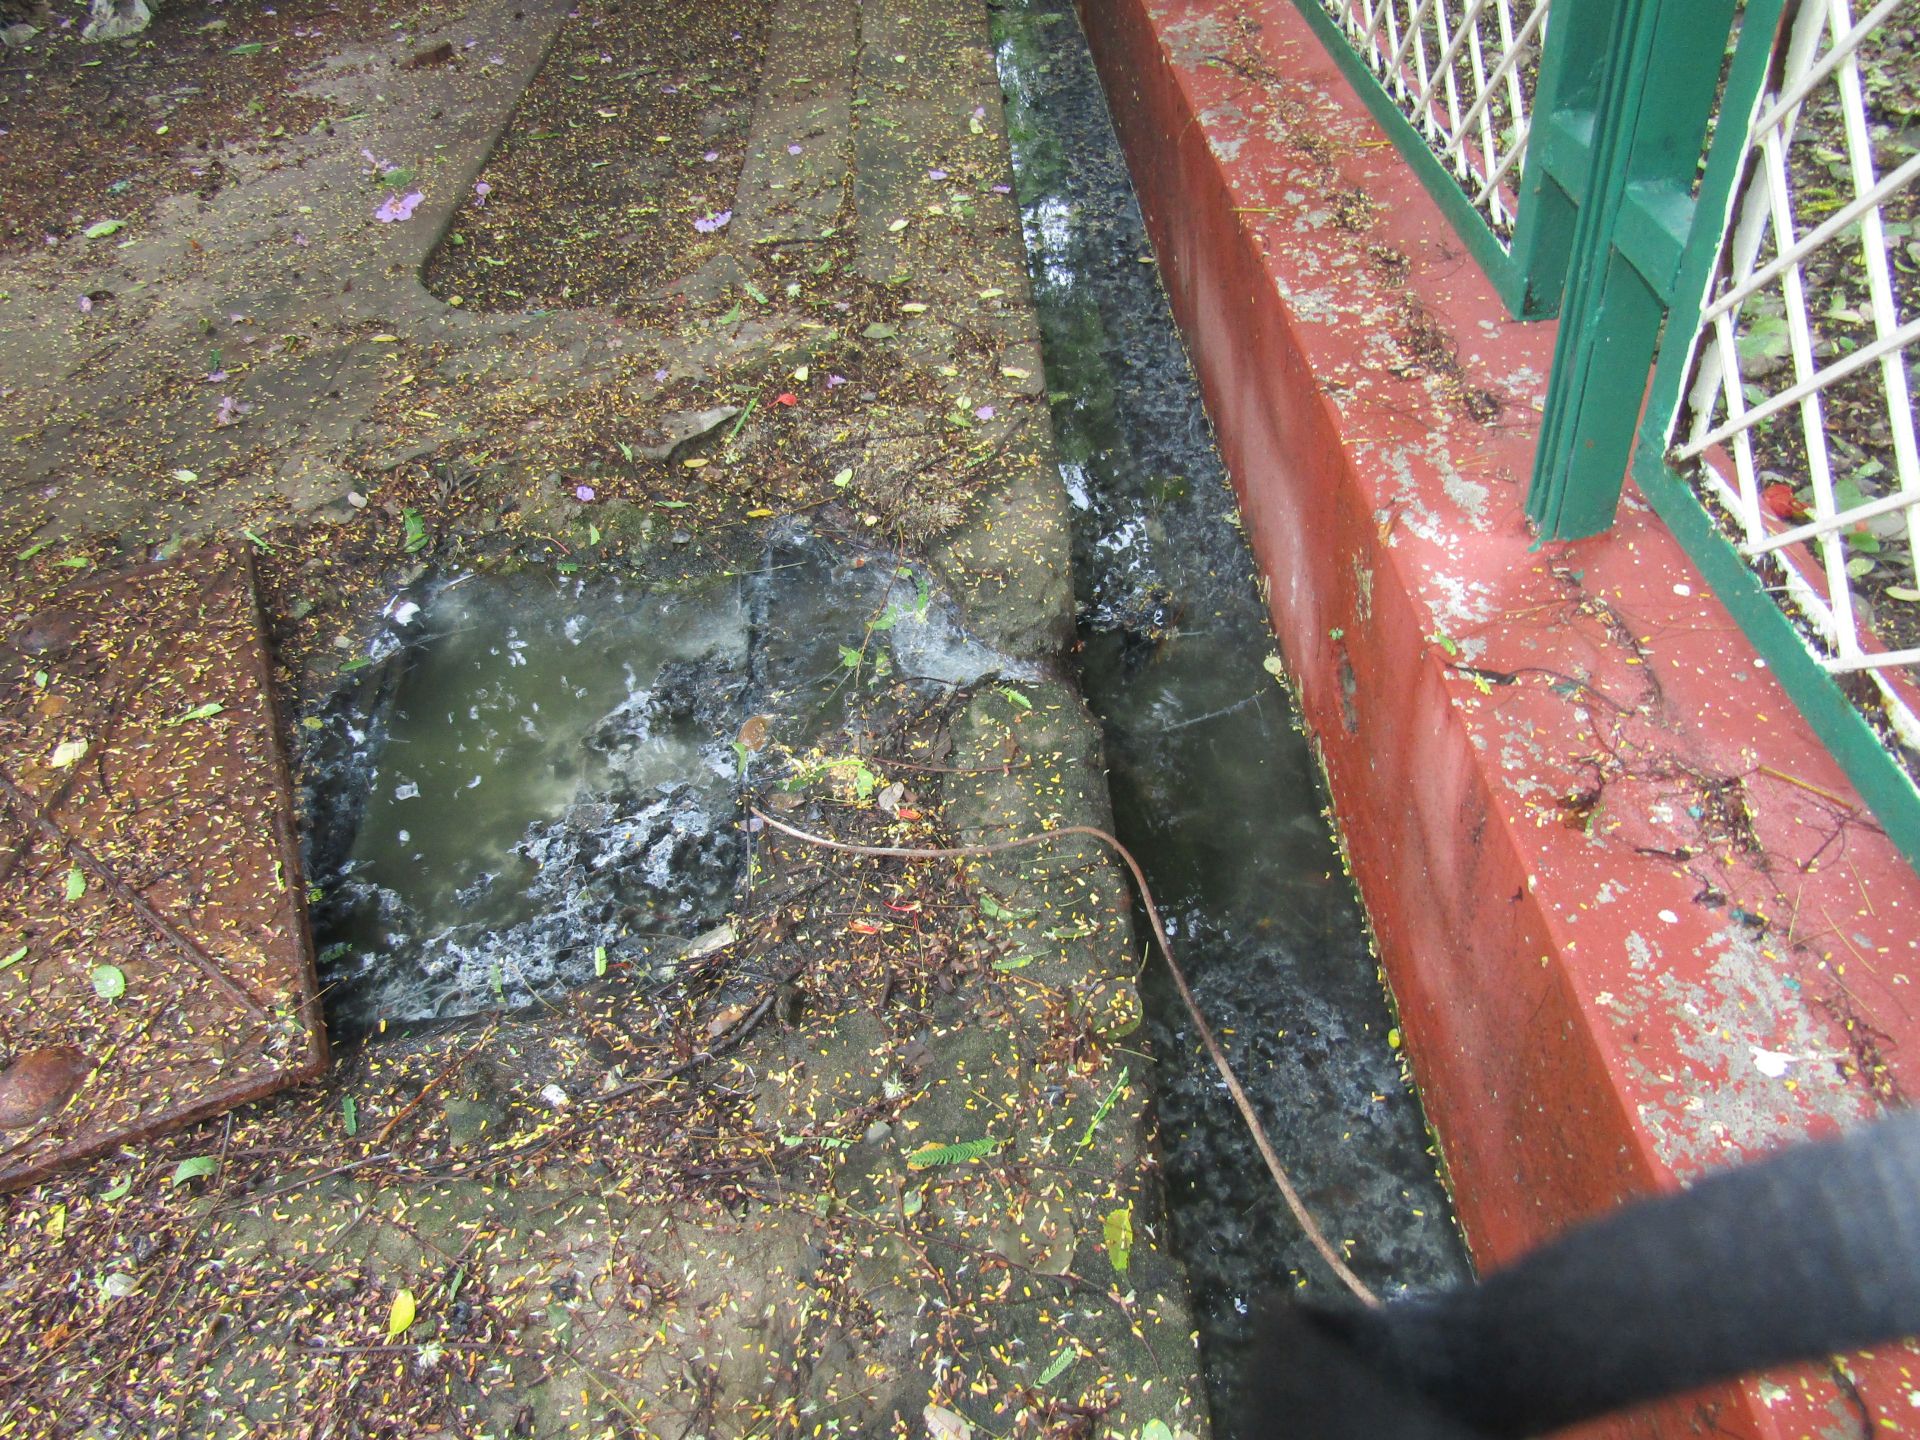 Septic tank outflow at the Ujjain development authority office which is being released untreated into an open drain.